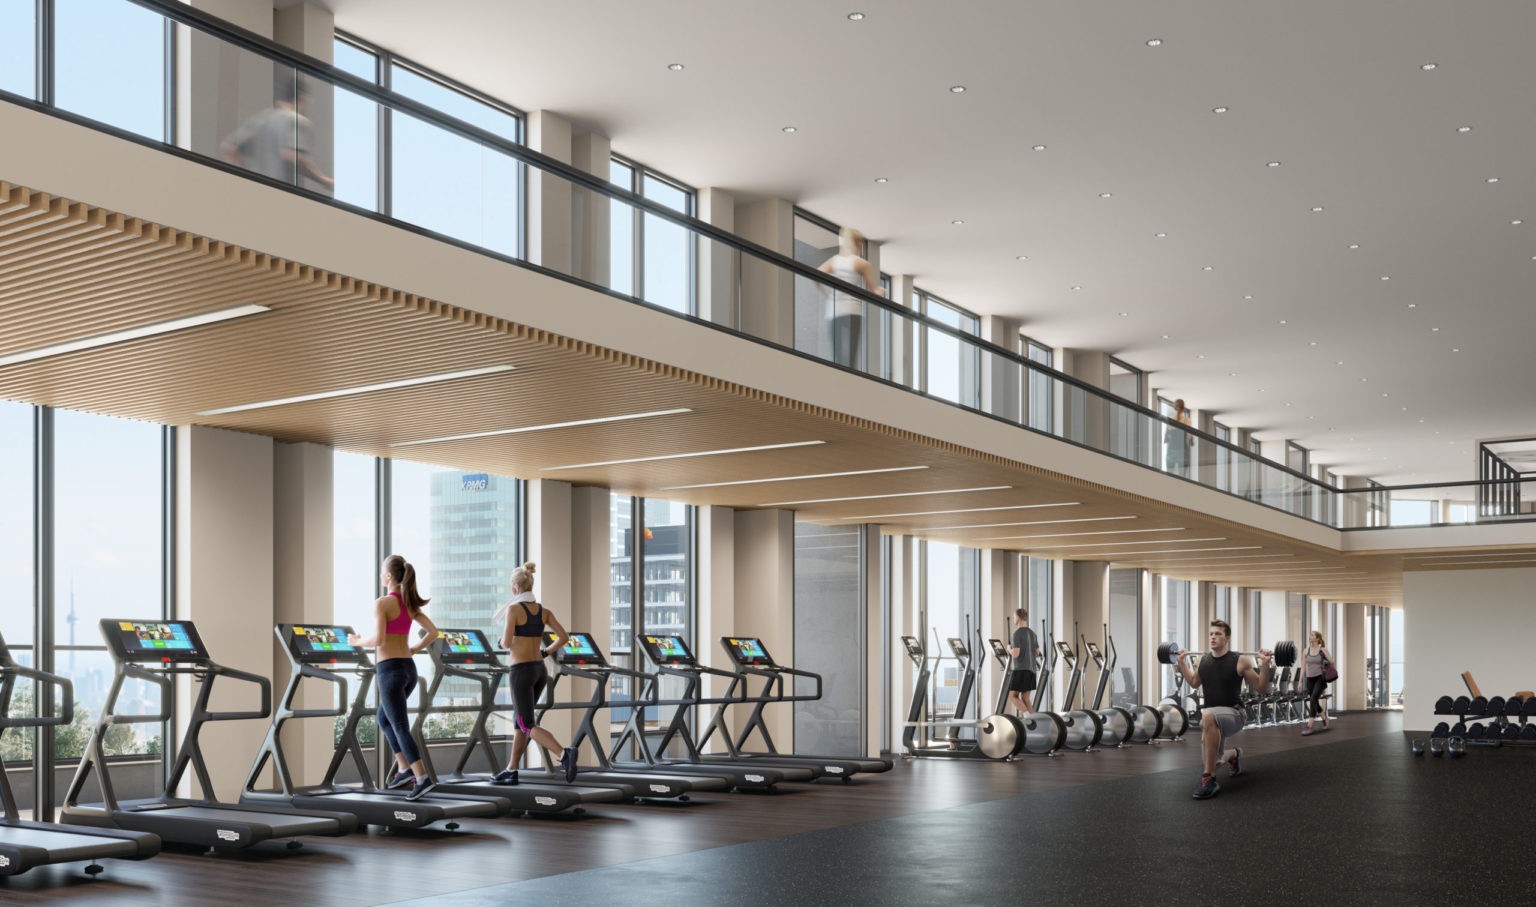 Transit City Amenity Centre Fitness Amenity Centre Design in Toronto ON Canada , by Cutler